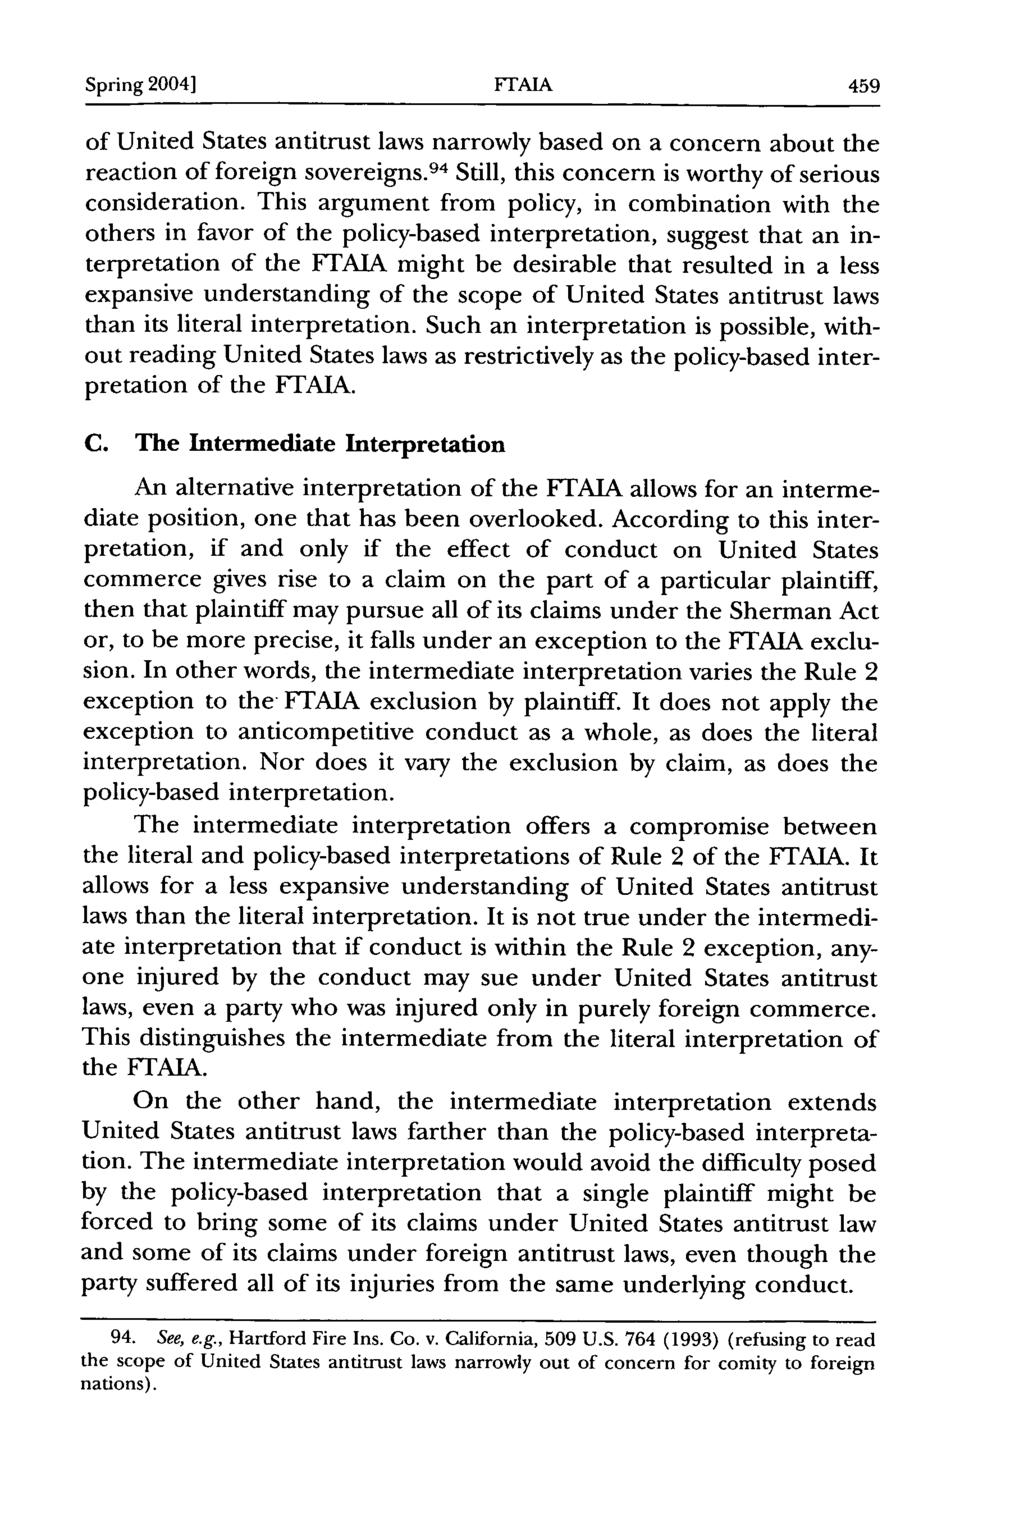 Spring 2004] FrAIA of United States antitrust laws narrowly based on a concern about the reaction of foreign sovereigns. 94 Still, this concern is worthy of serious consideration.